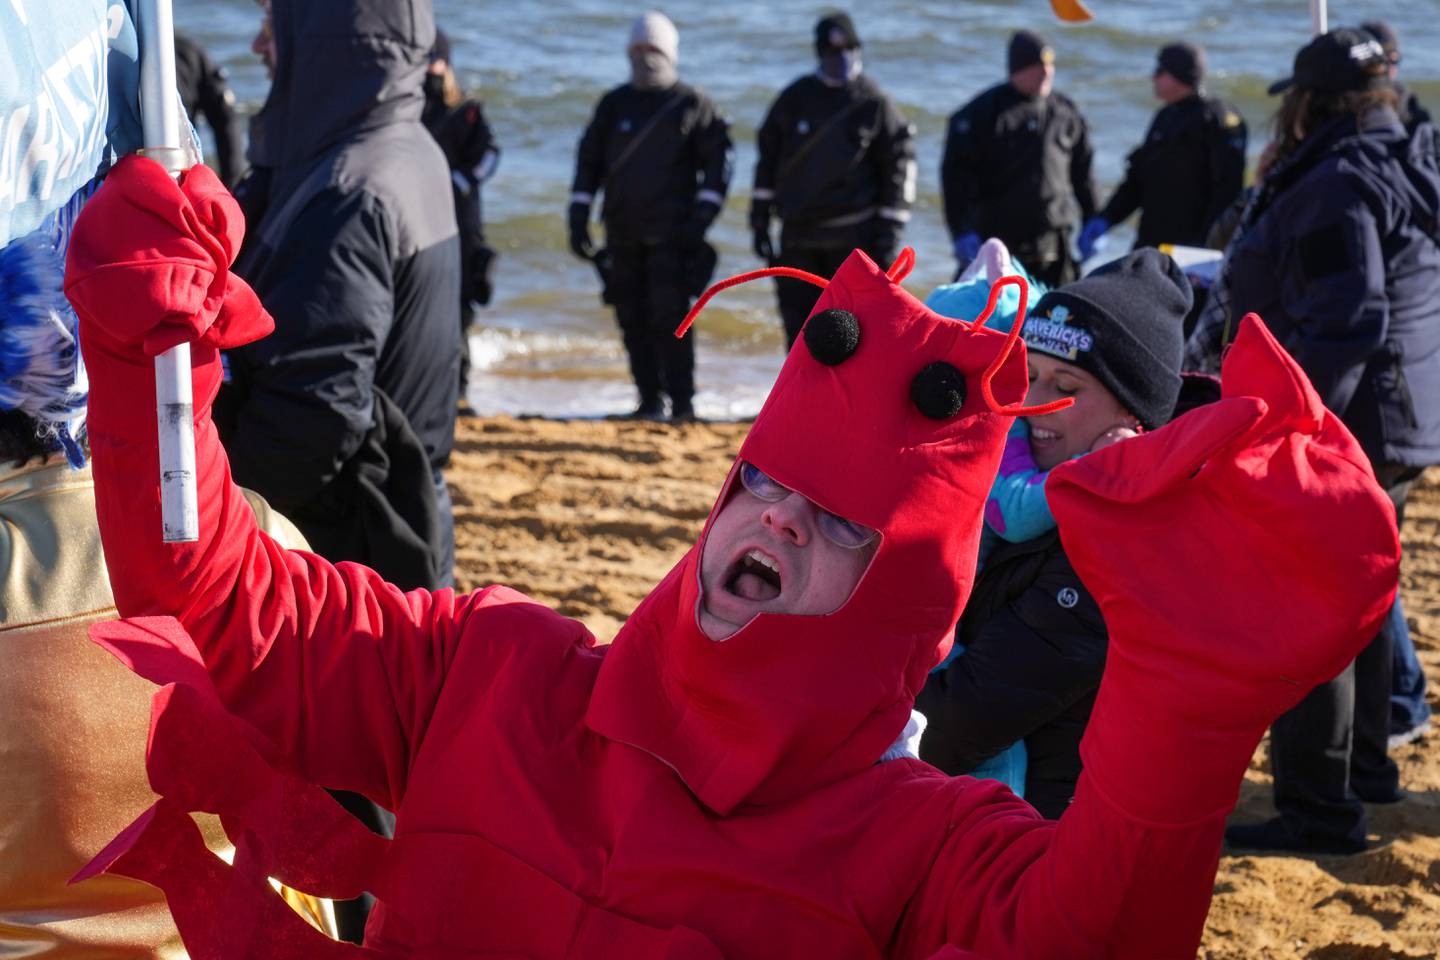 A man dressed a lobster enters the costume contest at the Polar Bear Plunge on 2/4/23 at Sandy Point State Park. The event, now in its 27th year, has raised more than $3.4 million for Special Olympics Maryland this year.